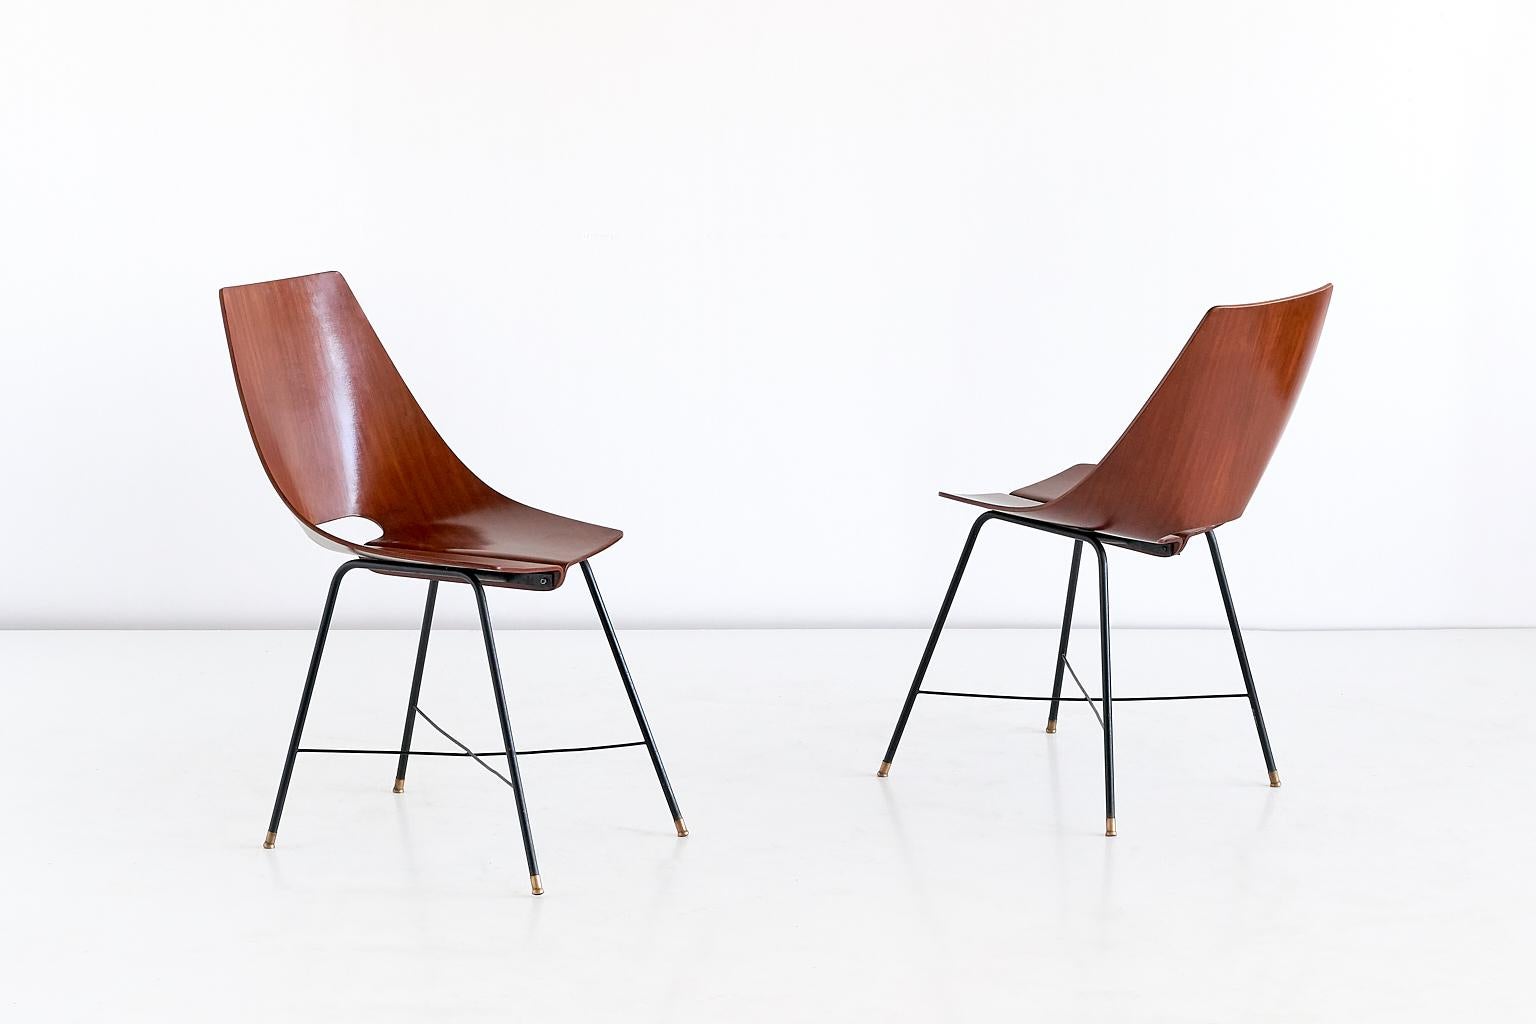 Metal Set of Six Dining Chairs by Societá Compensati Curvati, Italy, 1959